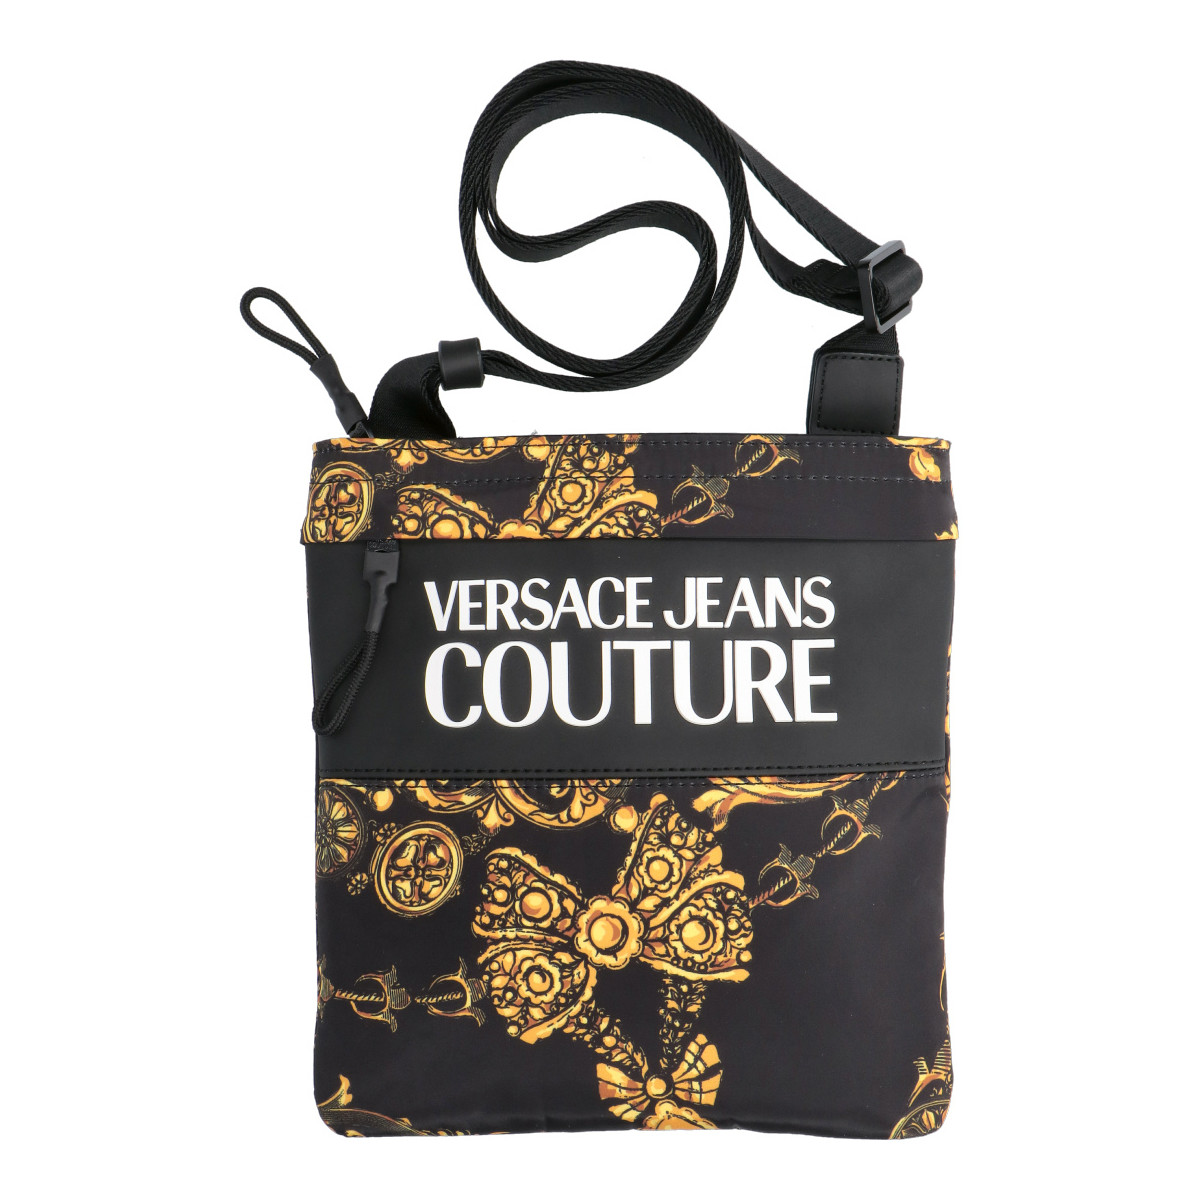 Versace Jeans Couture Tracolla Uomo t6M5bSxW